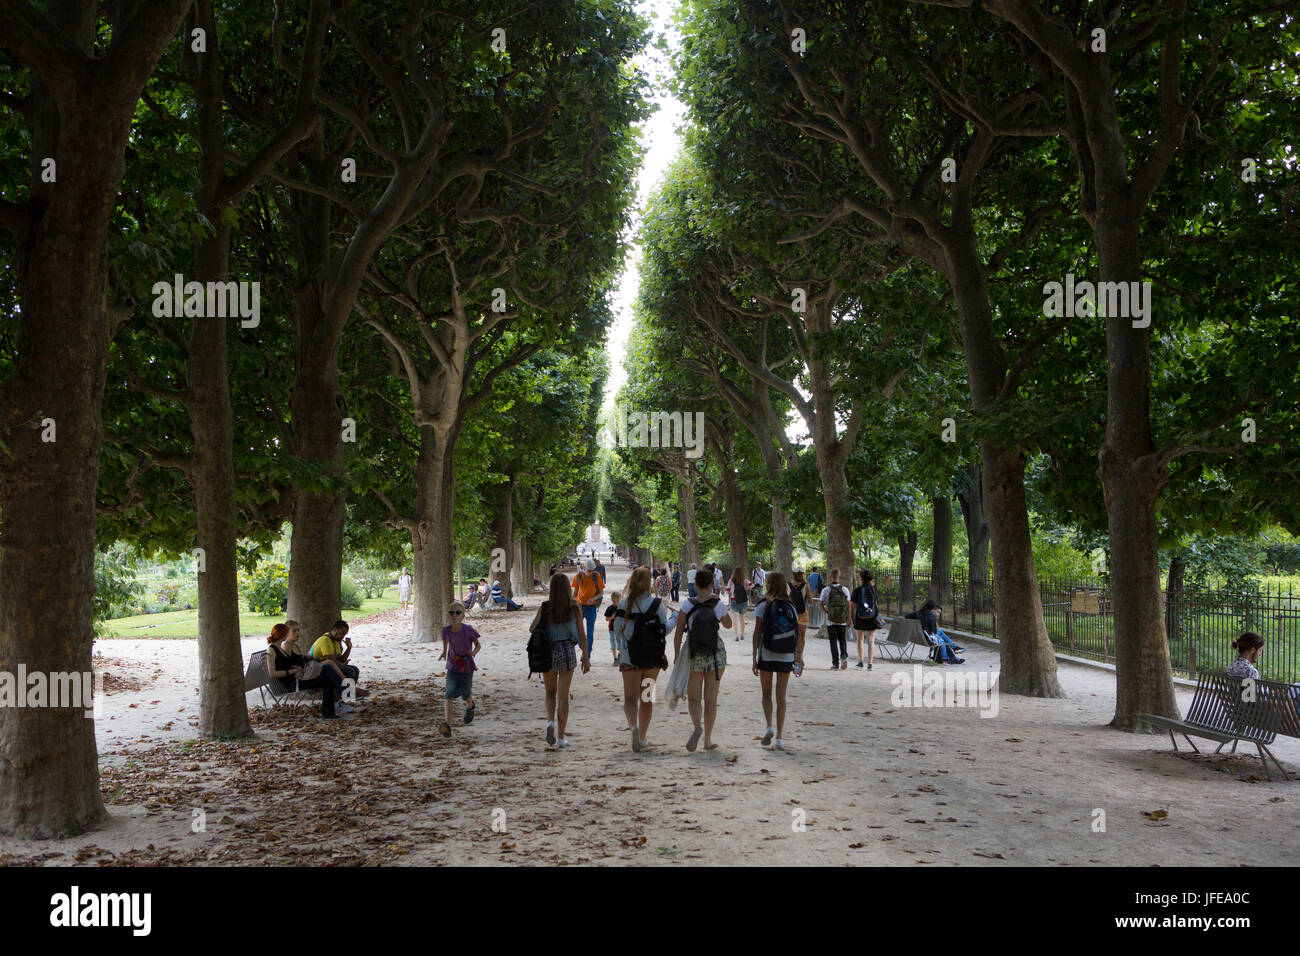 People walk along the path in the botanical garden of the Jardin des Plantes. Stock Photo